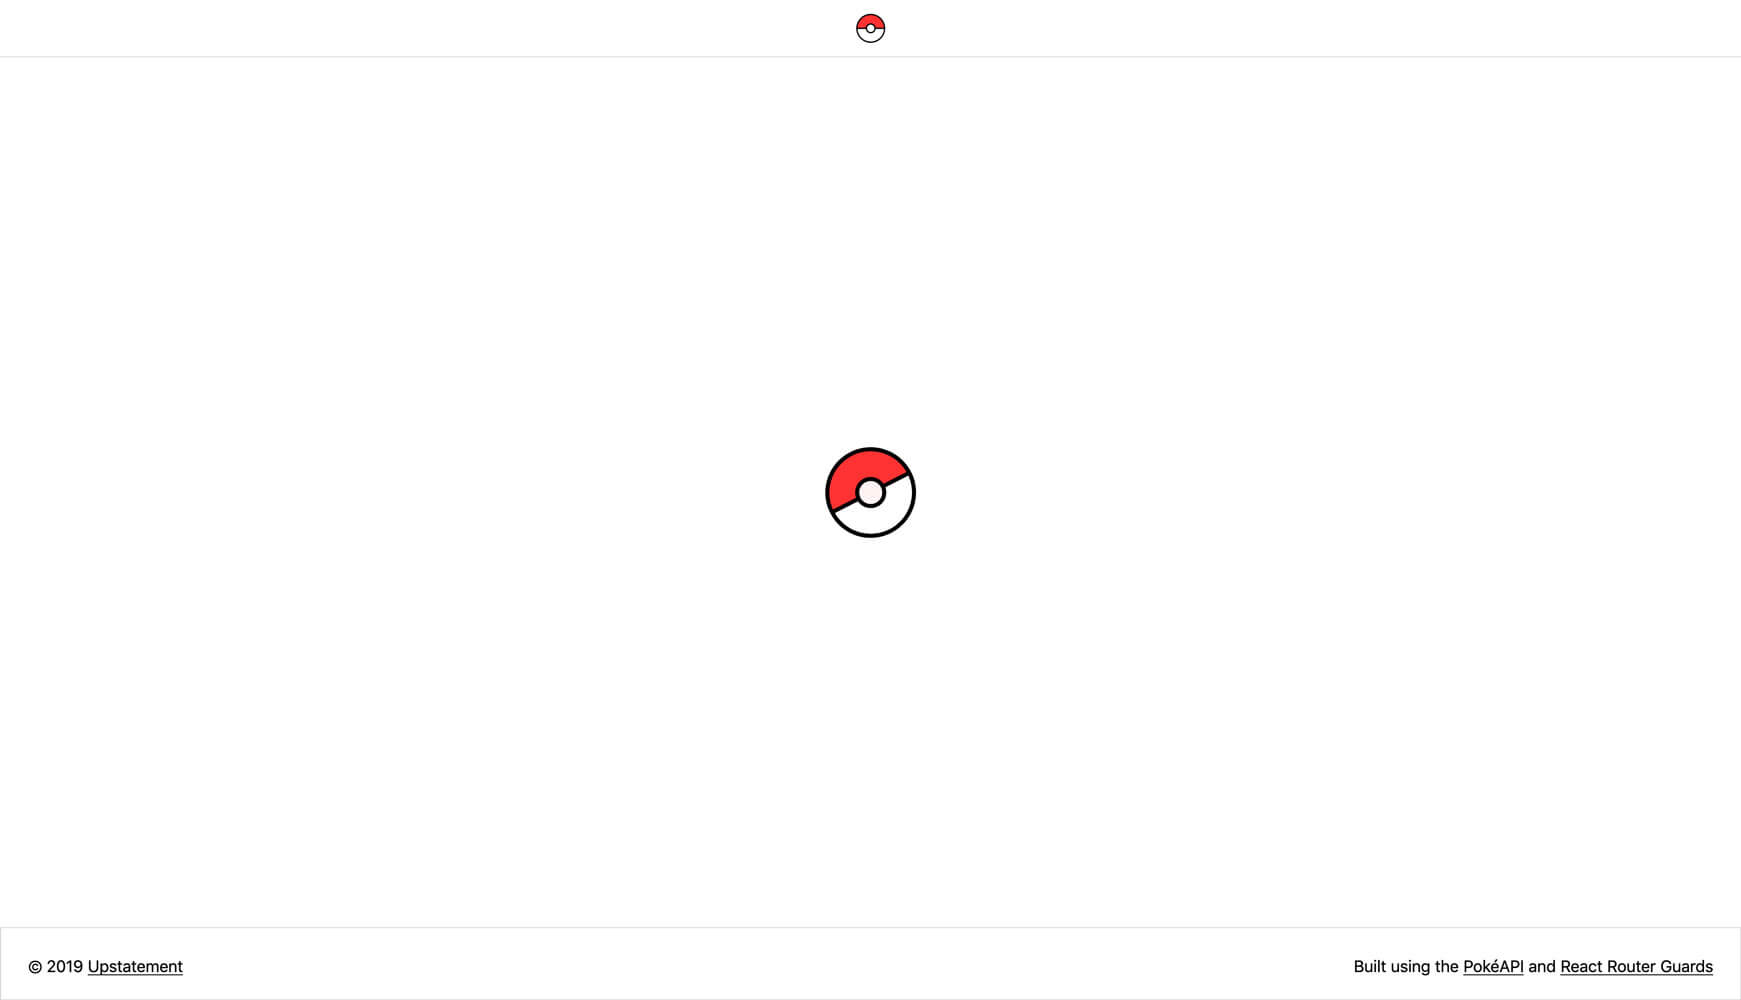 A Pokéball rotated in the center of the page